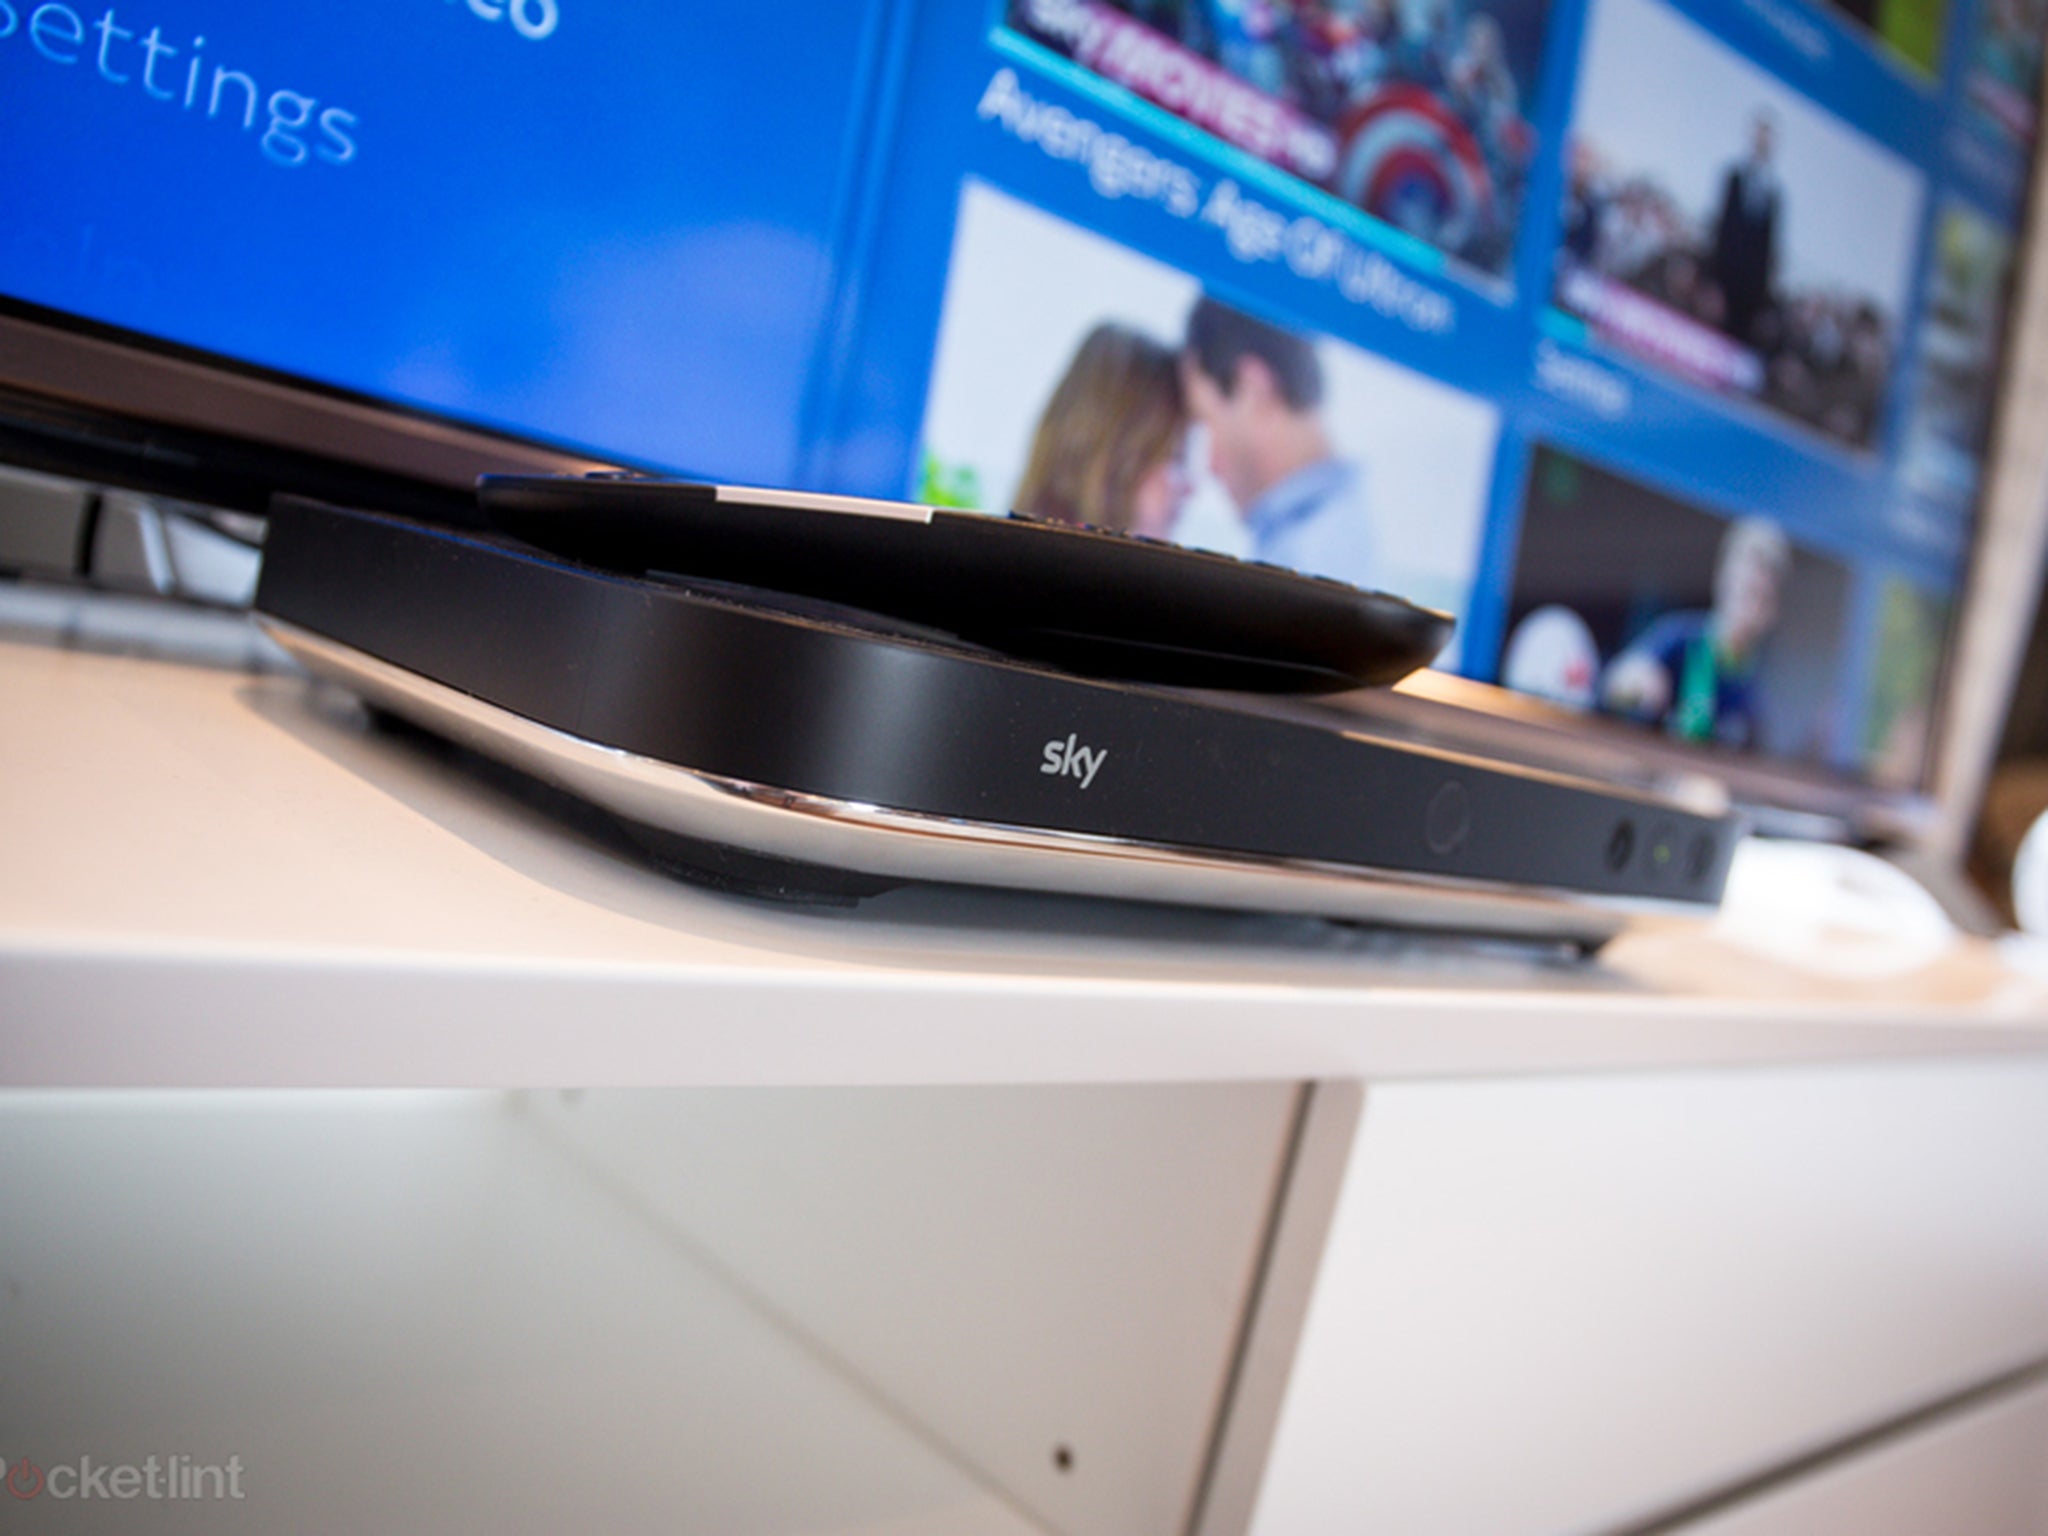 Sky Q goes on sale in February